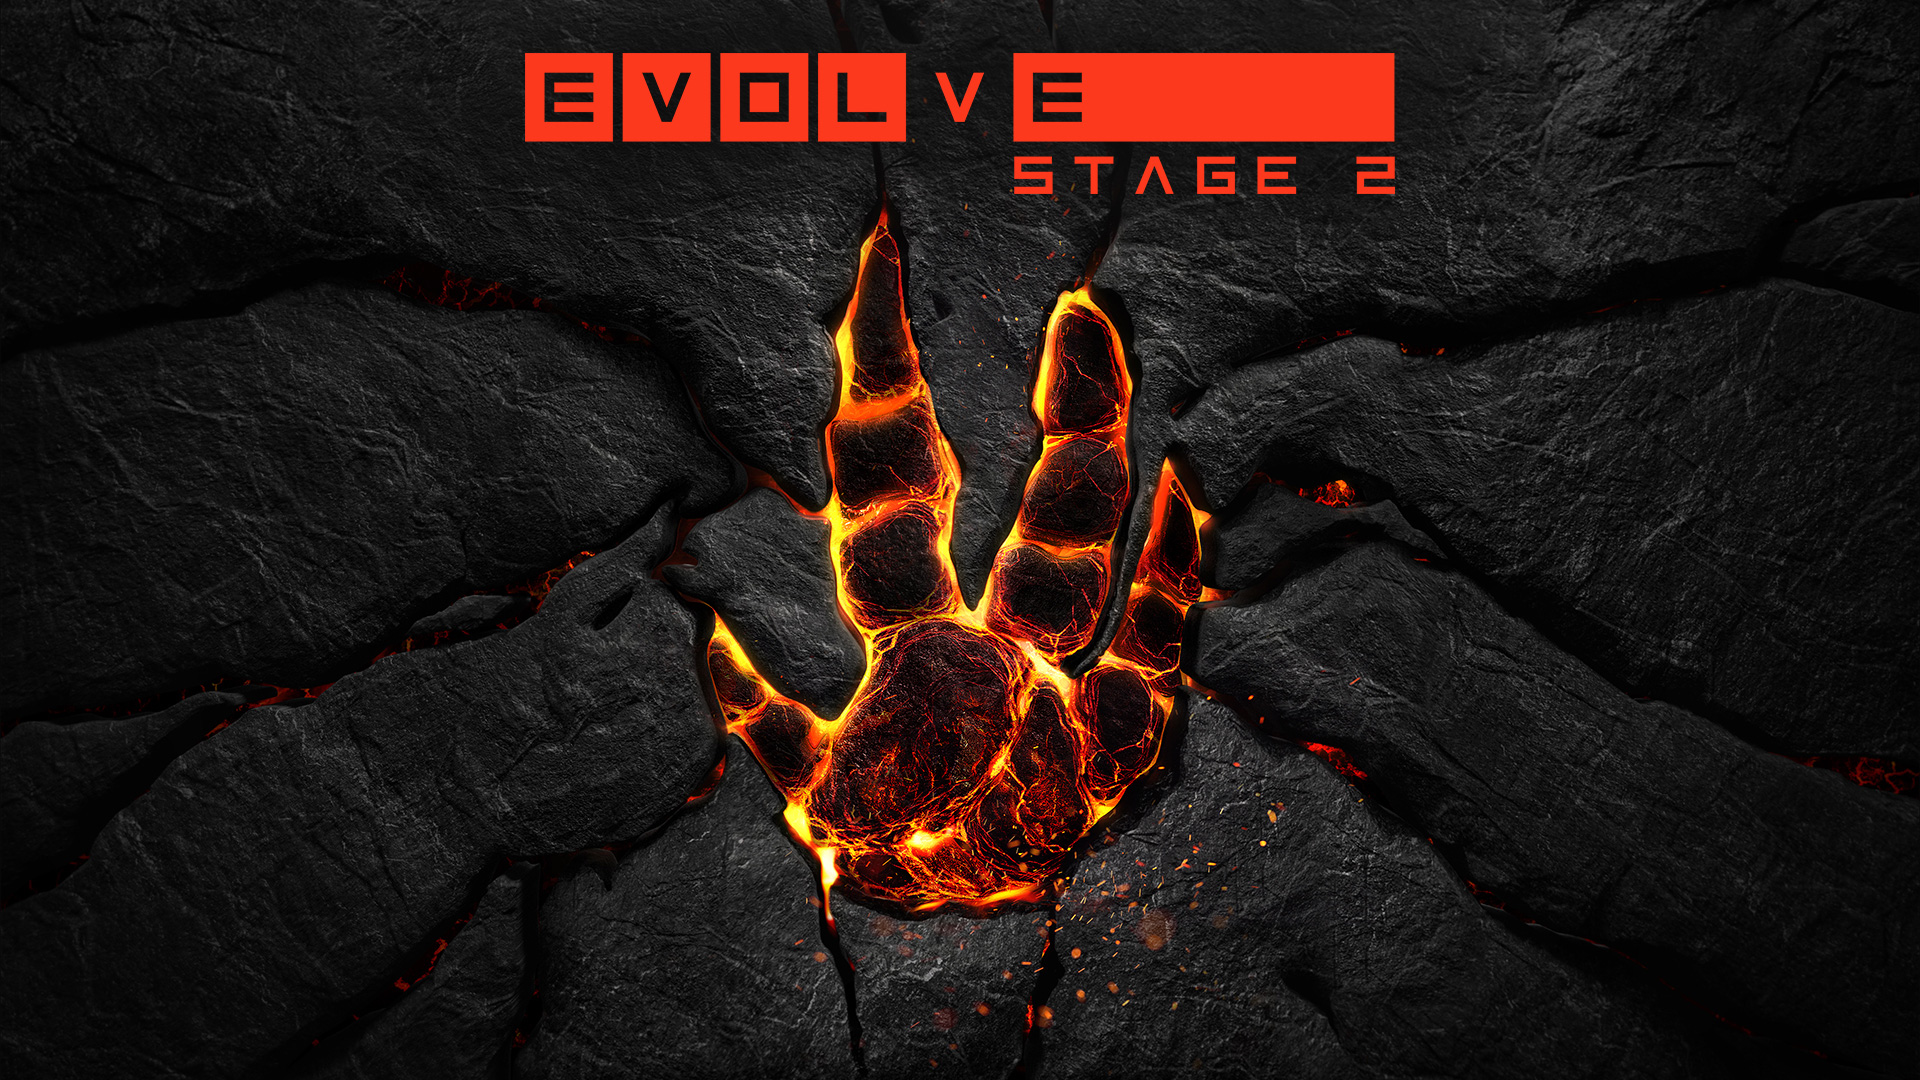 is evolve stage 2 still playable